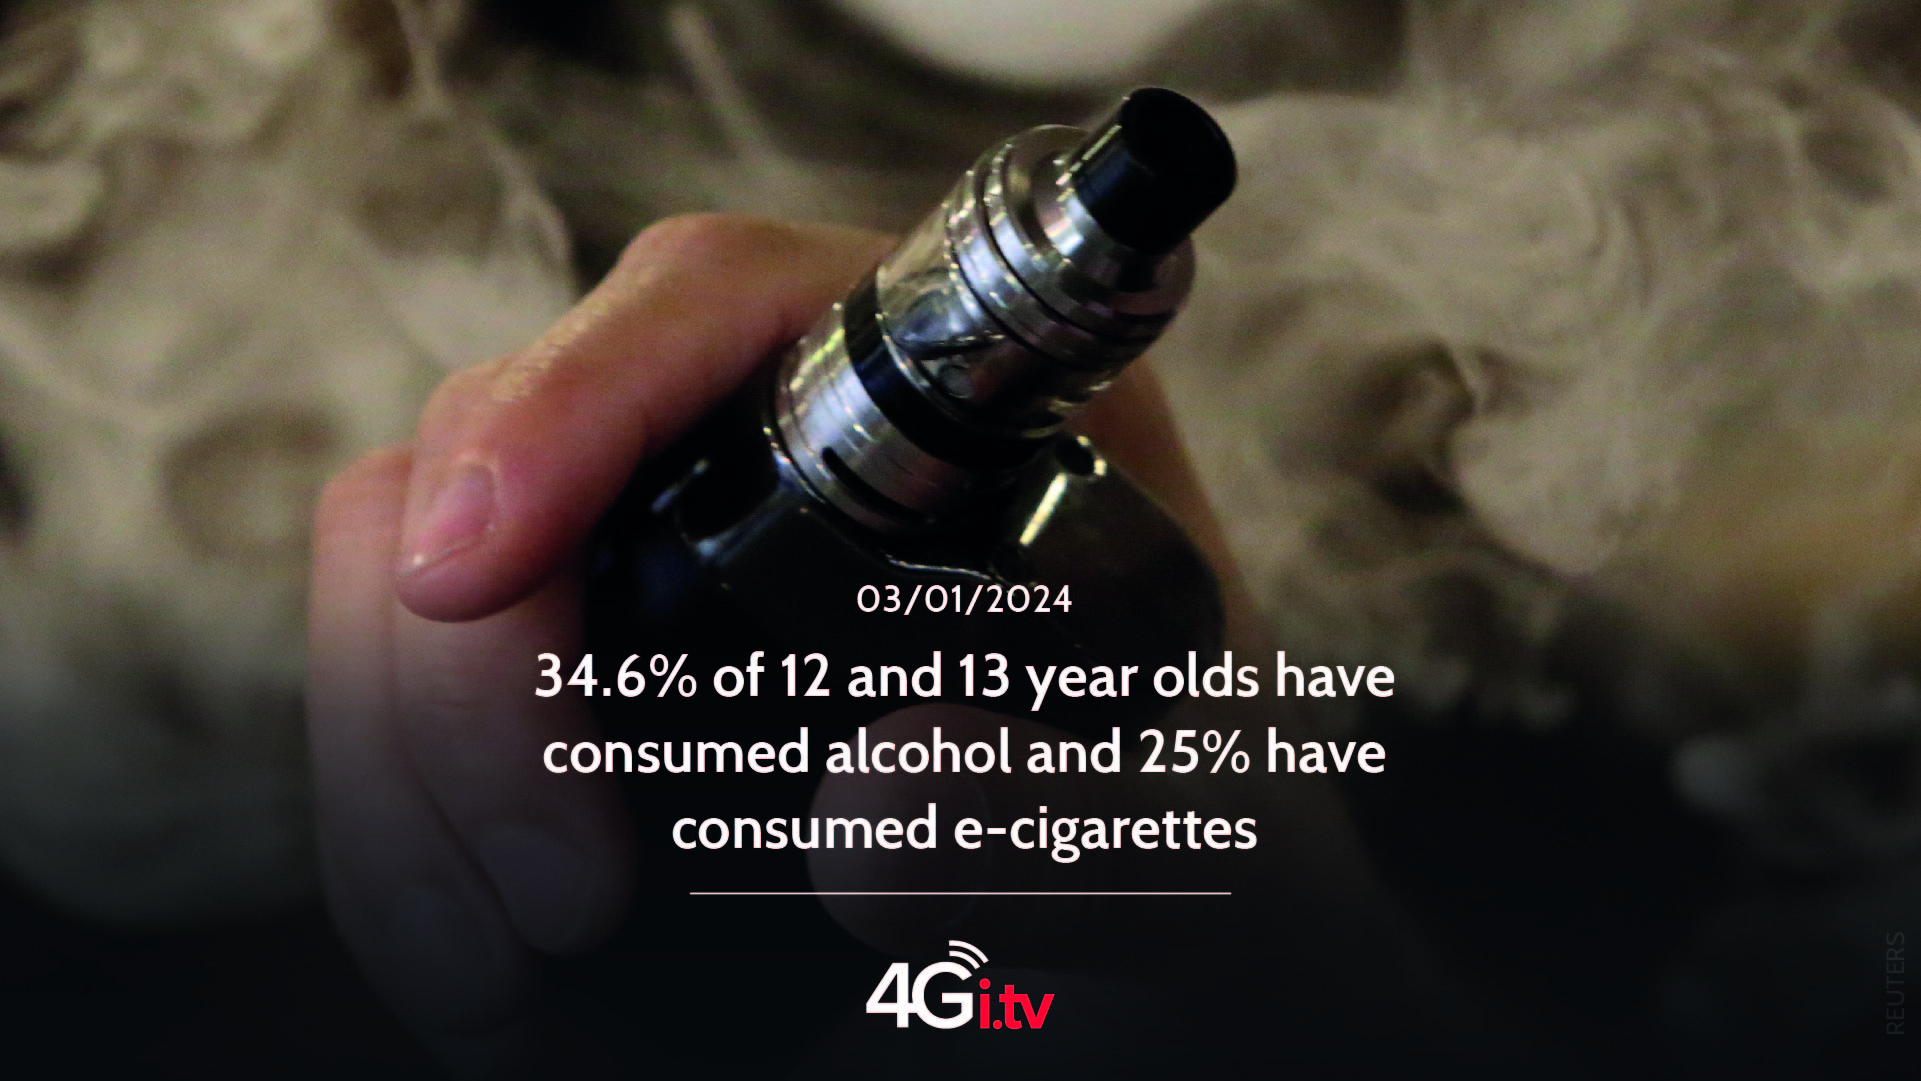 Lesen Sie mehr über den Artikel 34.6% of 12 and 13 year olds have consumed alcohol and 25% have consumed e-cigarettes